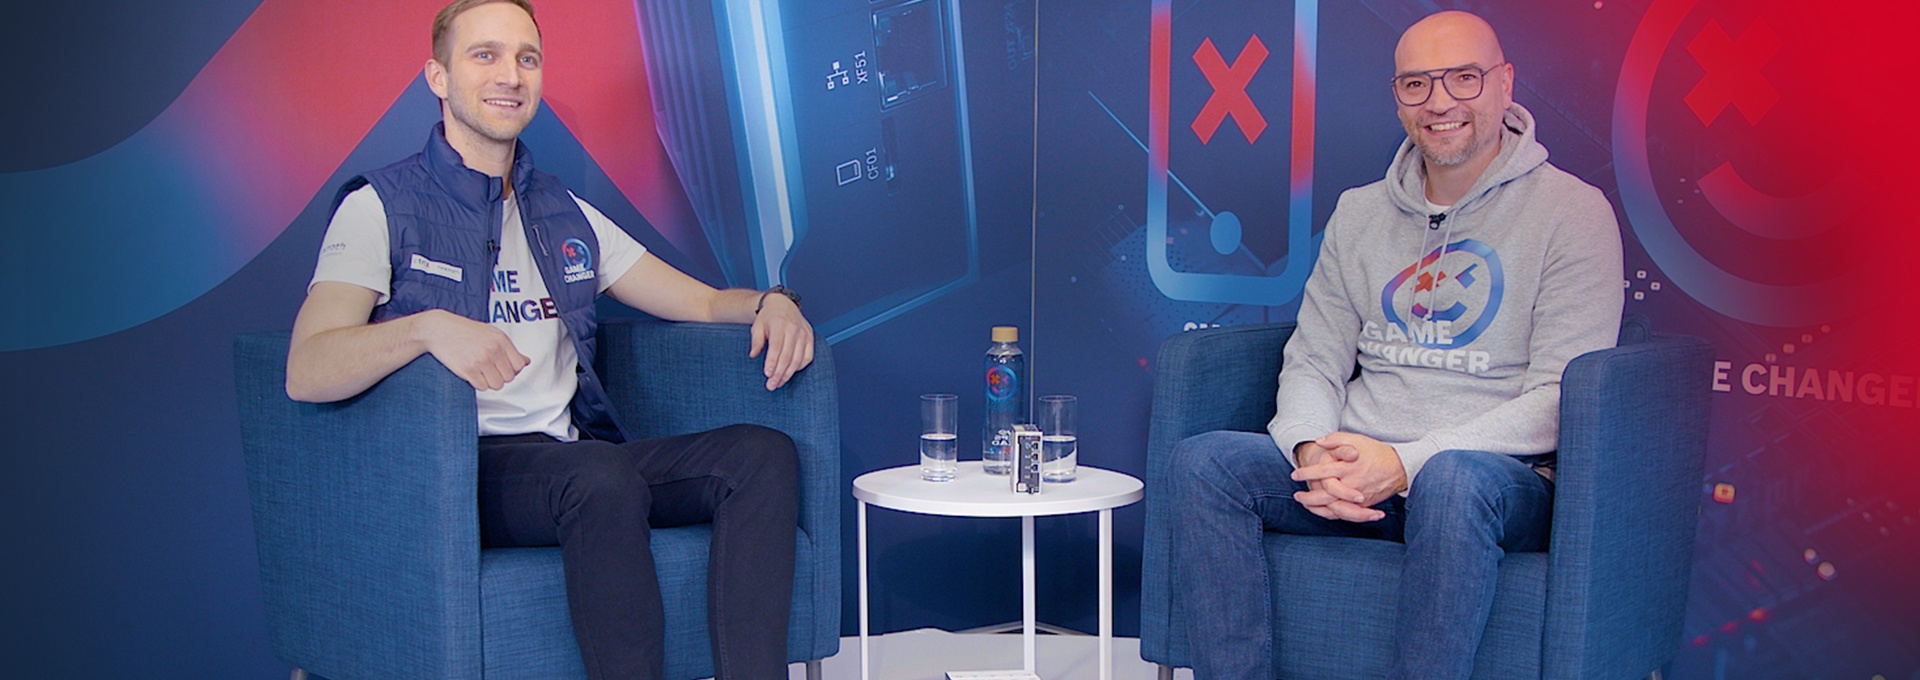 Host Christian Zentraf and his guest André Stury talk about Machine Learning and AIoT.